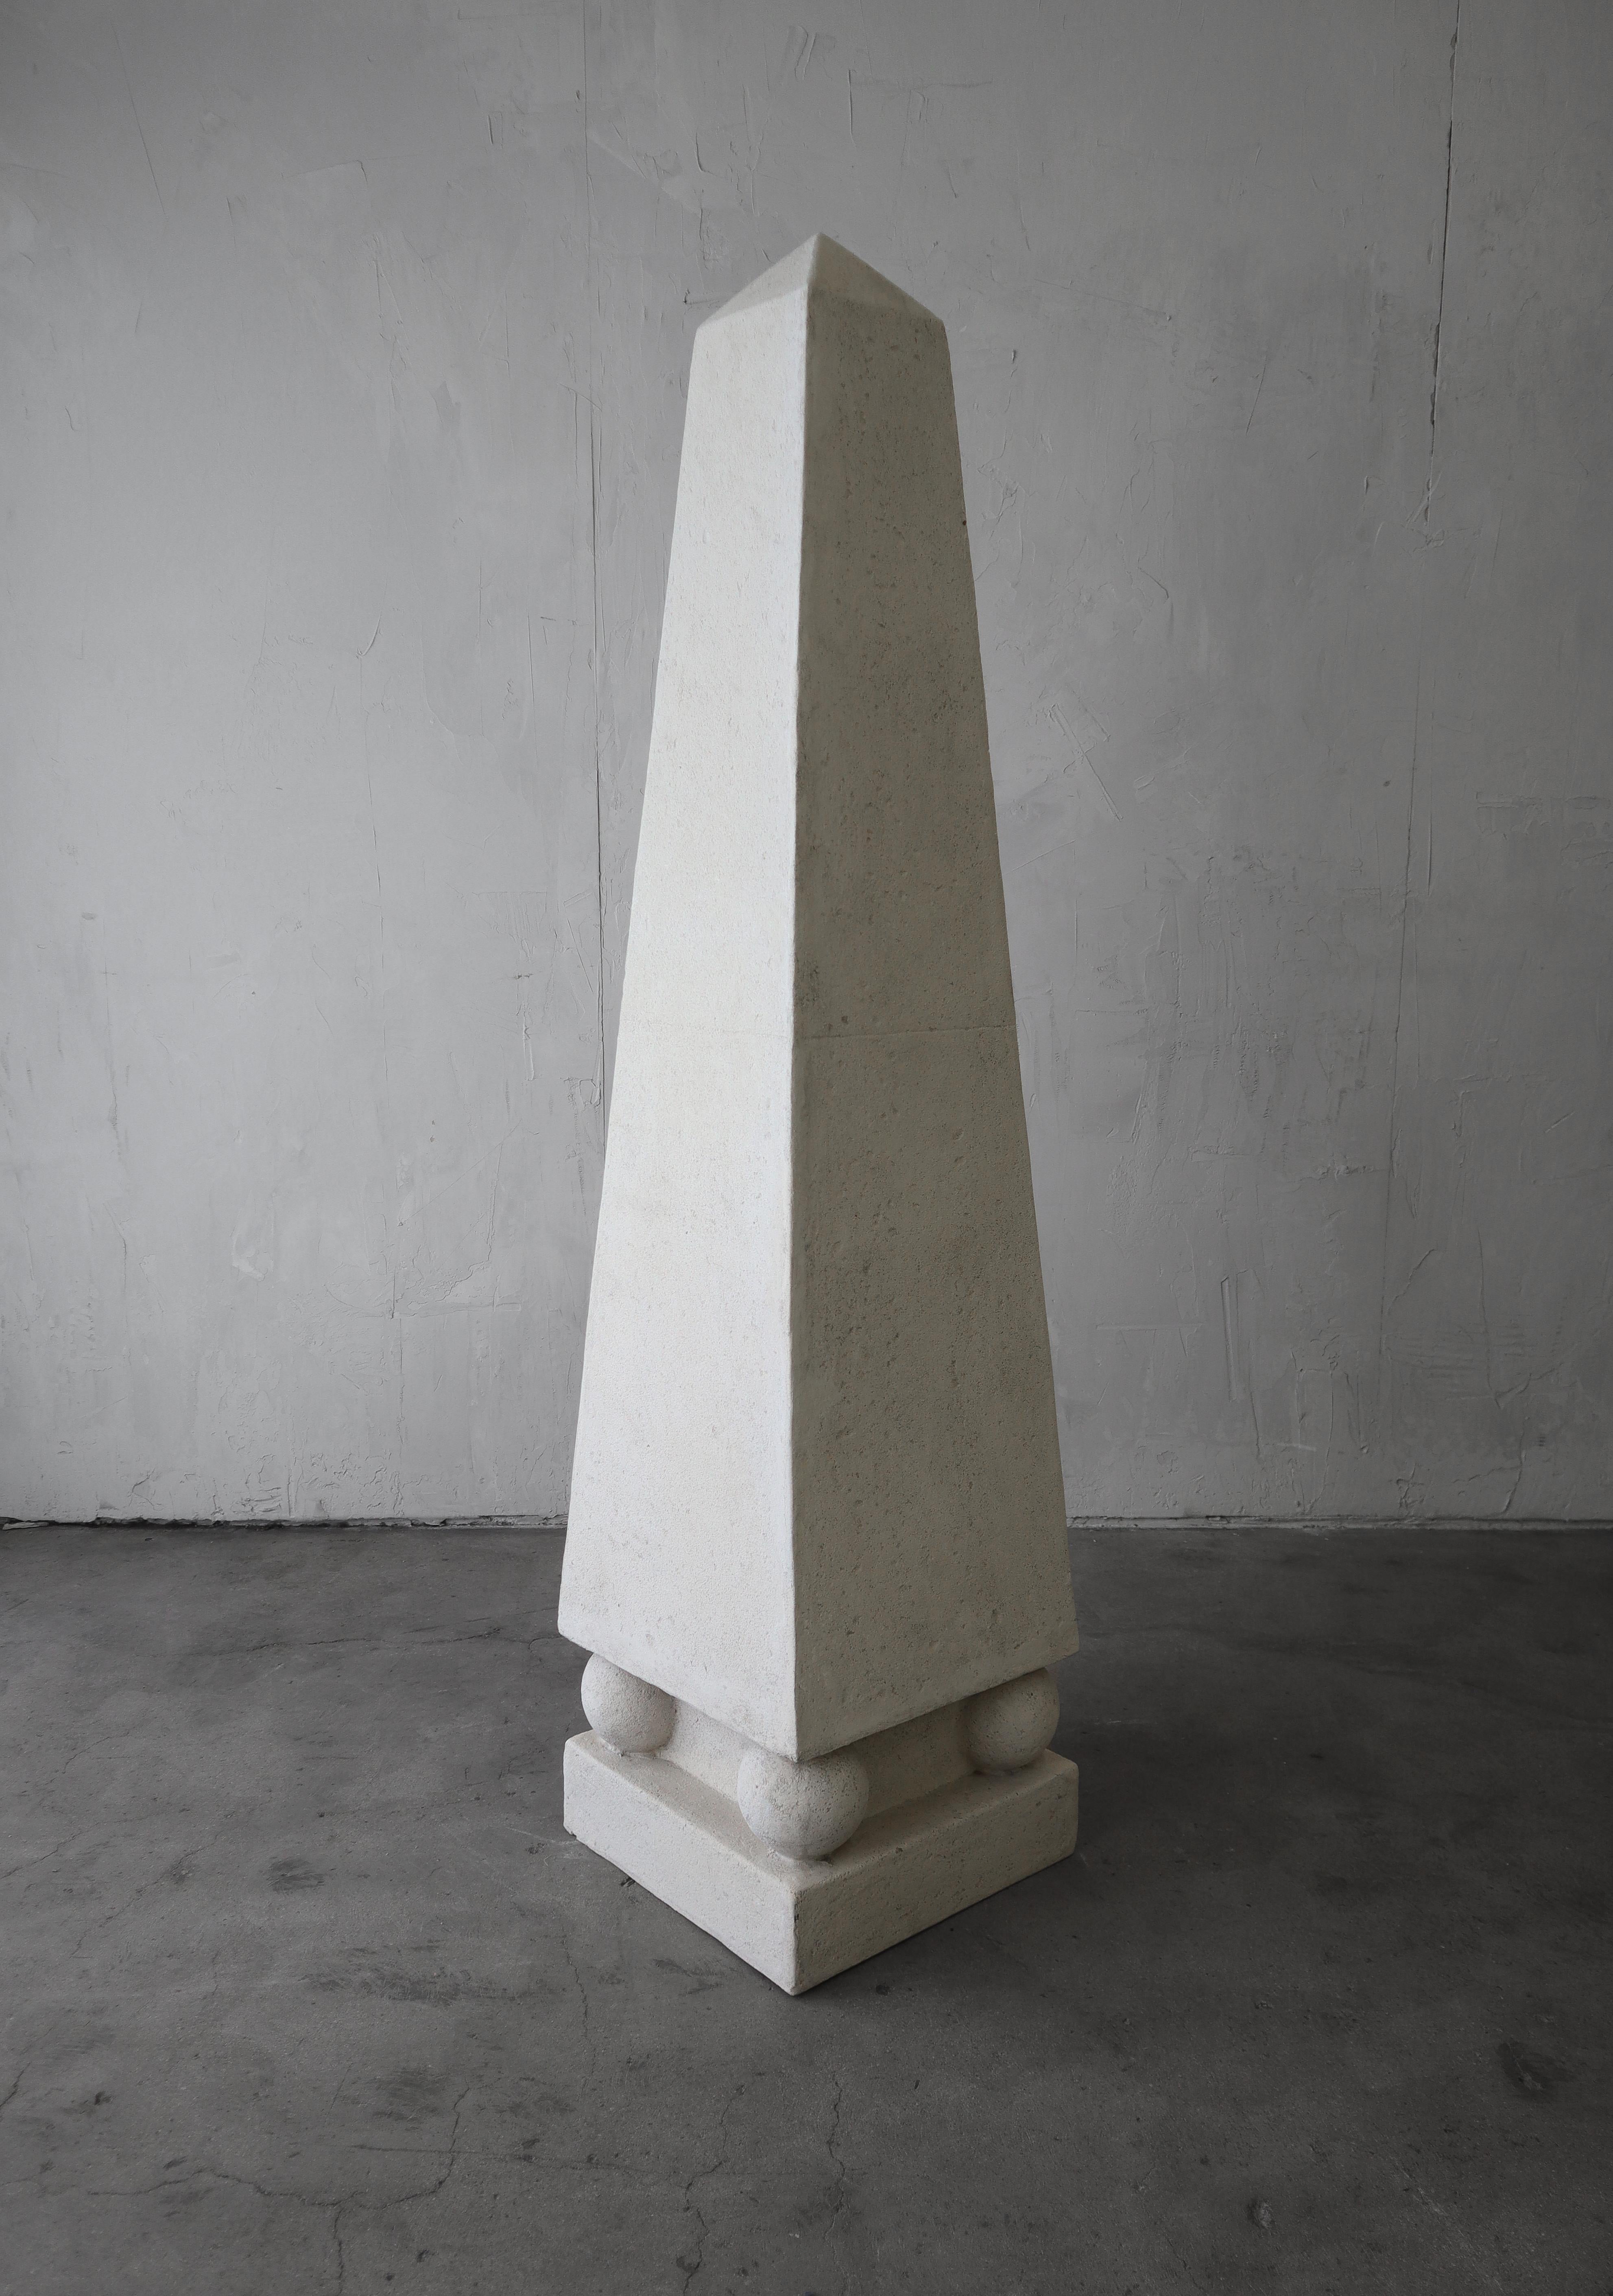 Monumental obelisk floor sculpture. Can be used indoors or out as a super cool, architectural decor accent.

Constructed out of fiberglass and covered in a fine sand like plaster. Some minimal marks and color variations, but they add to the depth